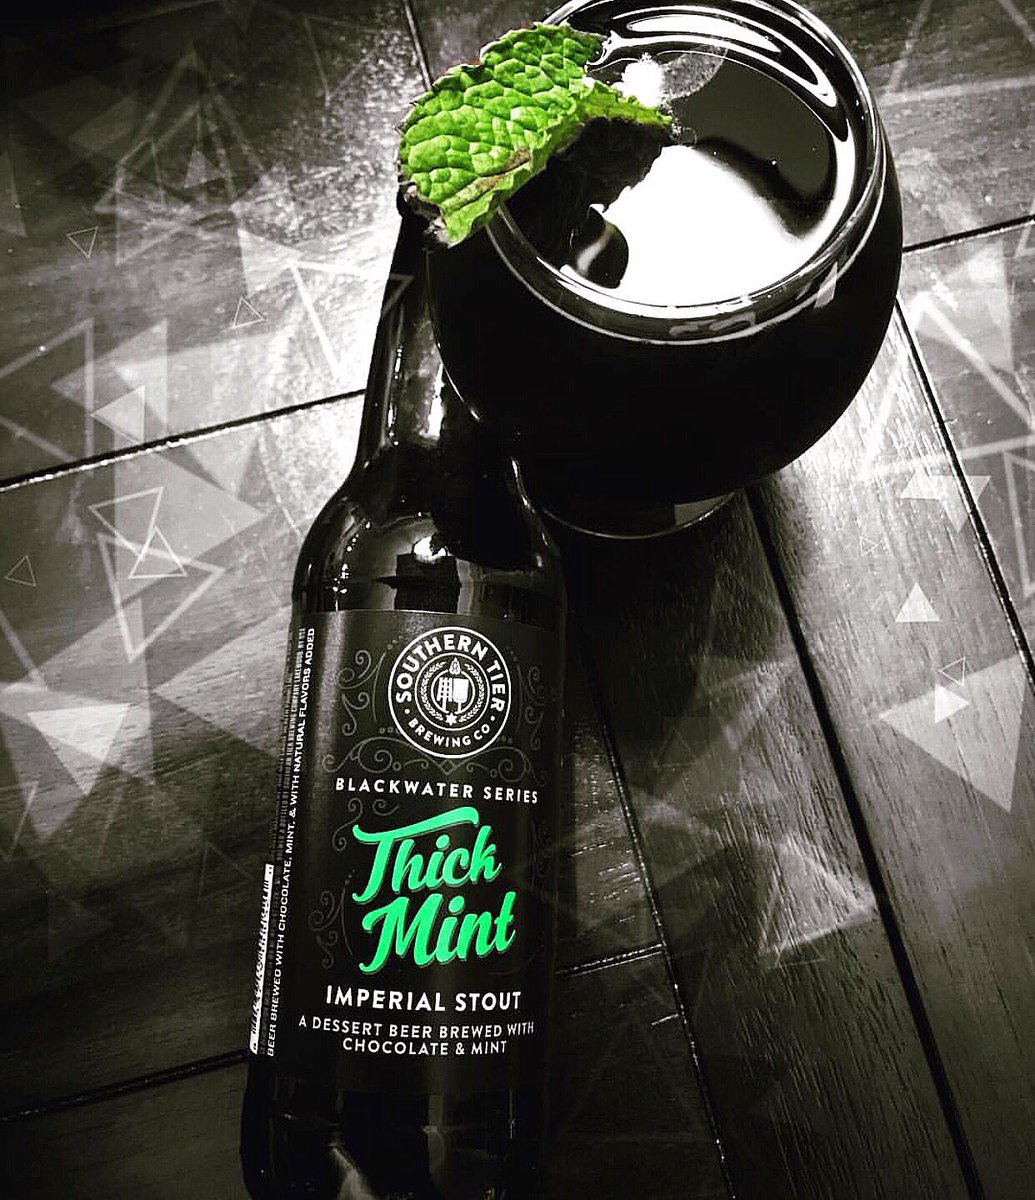 Our motto? Drink your dessert. Ok, so that's not our official motto...but we still say Thick Mint is more than worth a hike to the store! #ThickMint #ImperialStout #DessertBeer